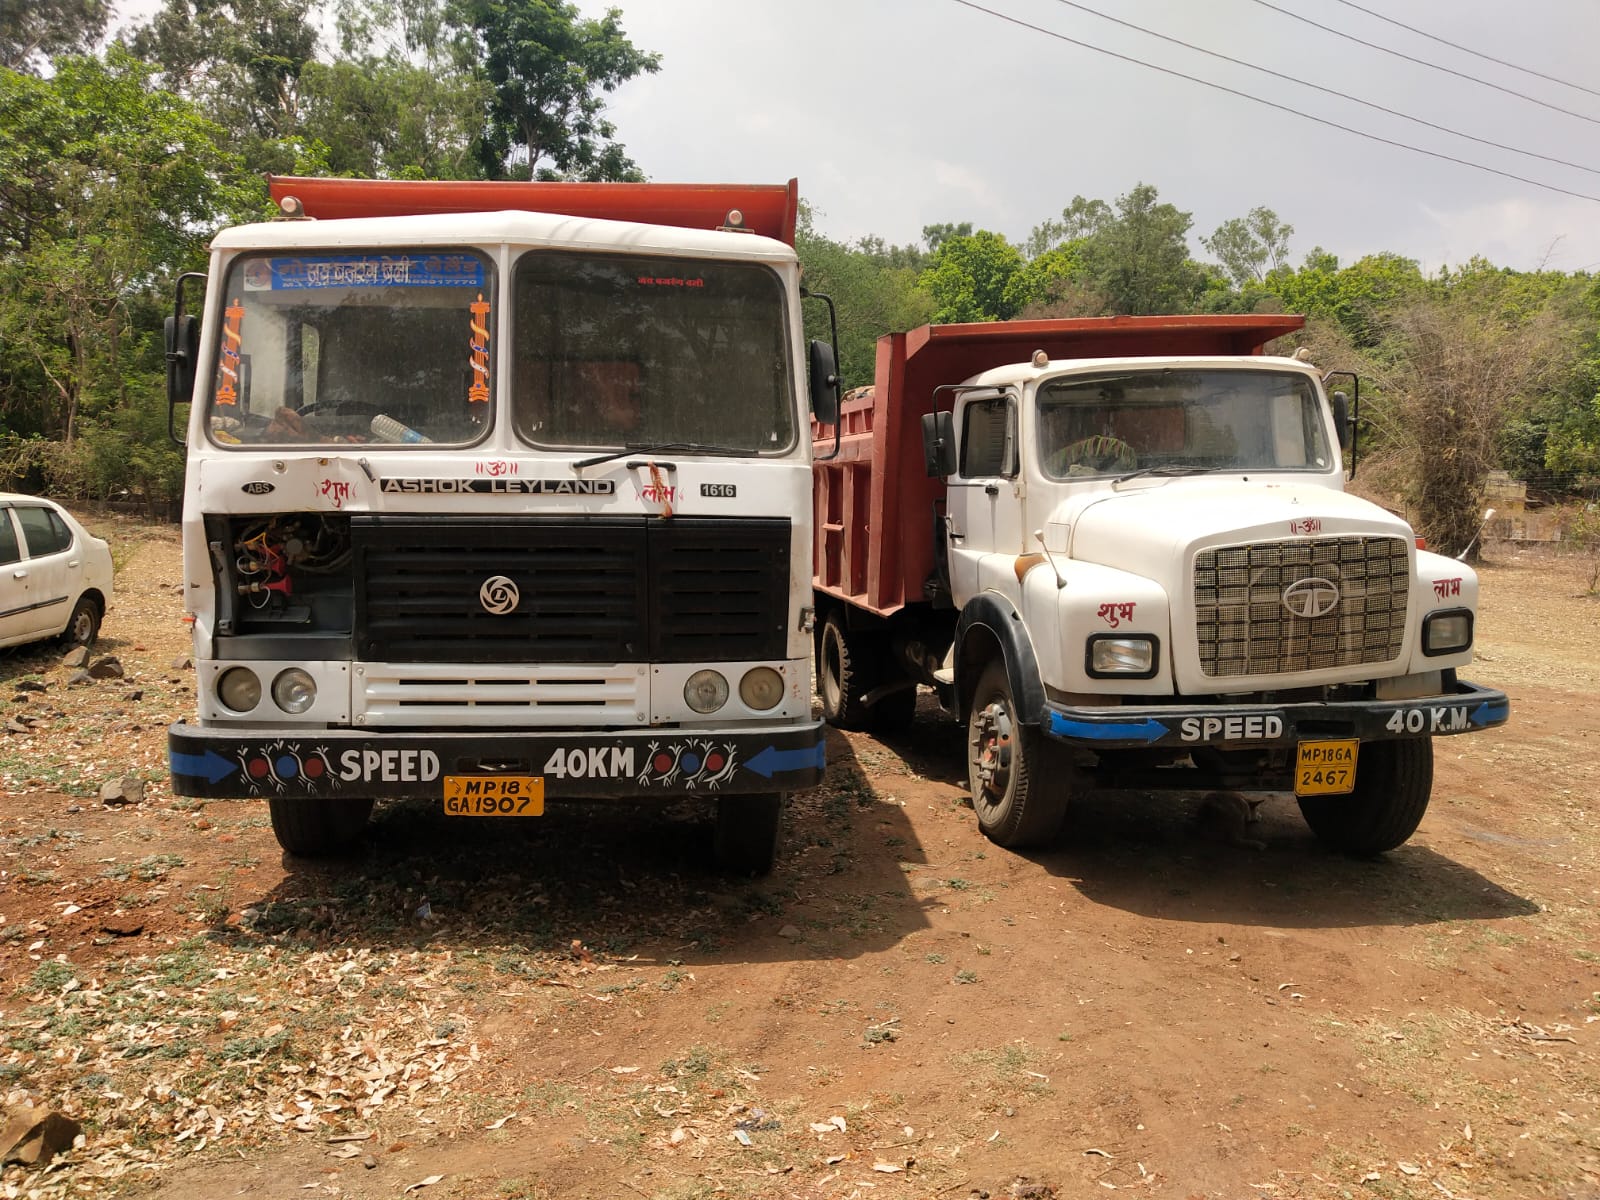 Here two vehicles were carrying stones from the mine, the drivers did